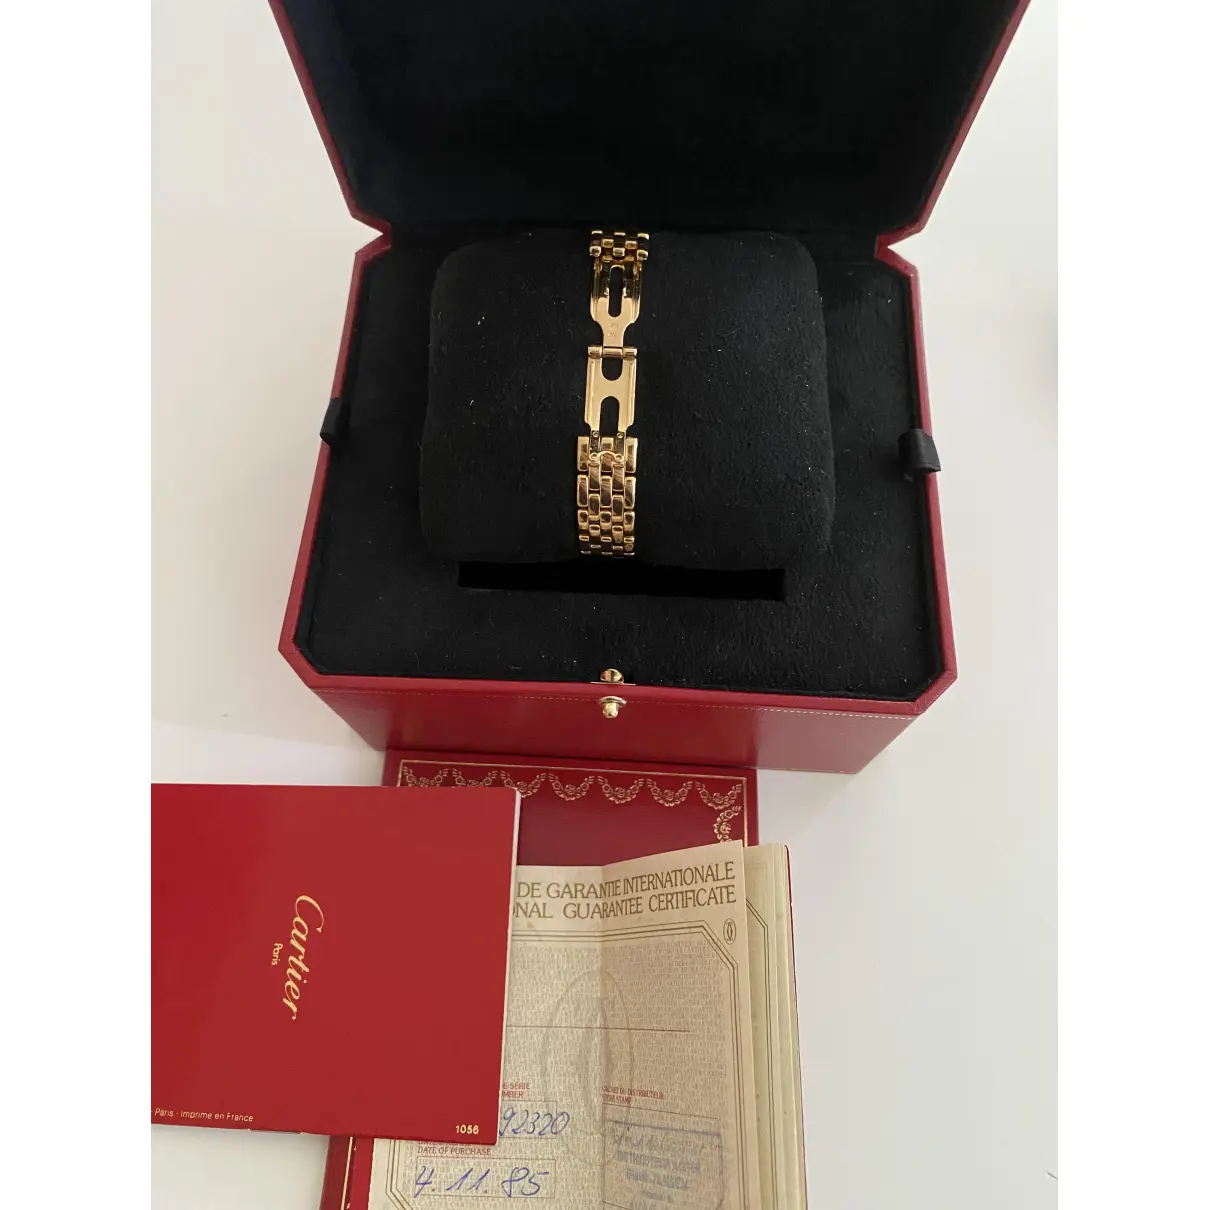 Panthère yellow gold watch Cartier - Vintage